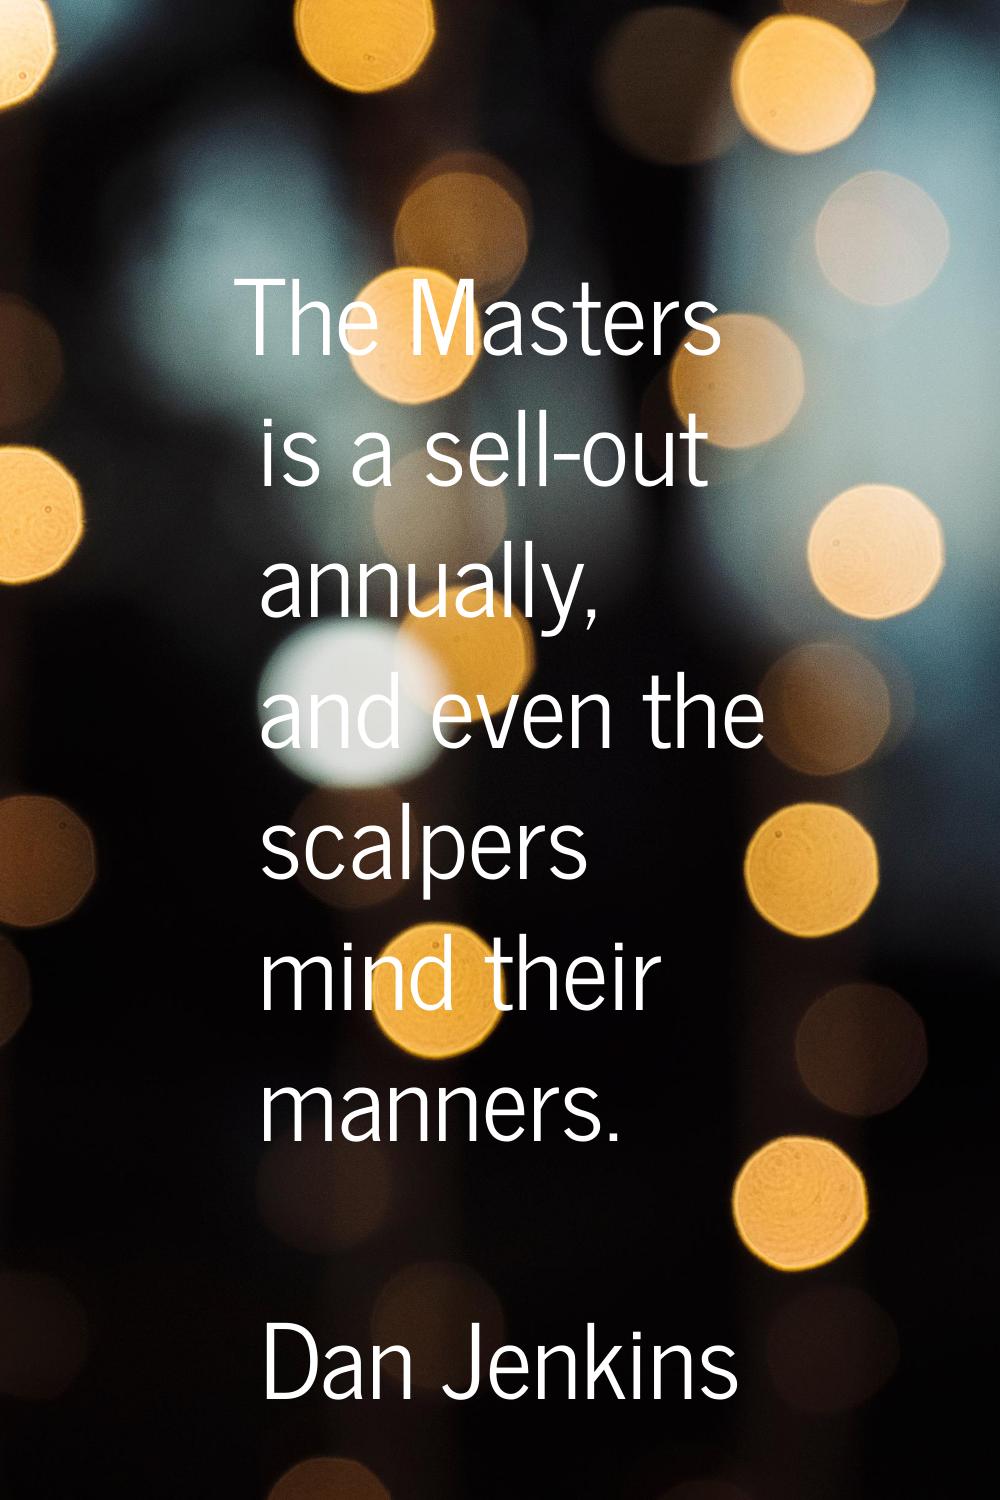 The Masters is a sell-out annually, and even the scalpers mind their manners.